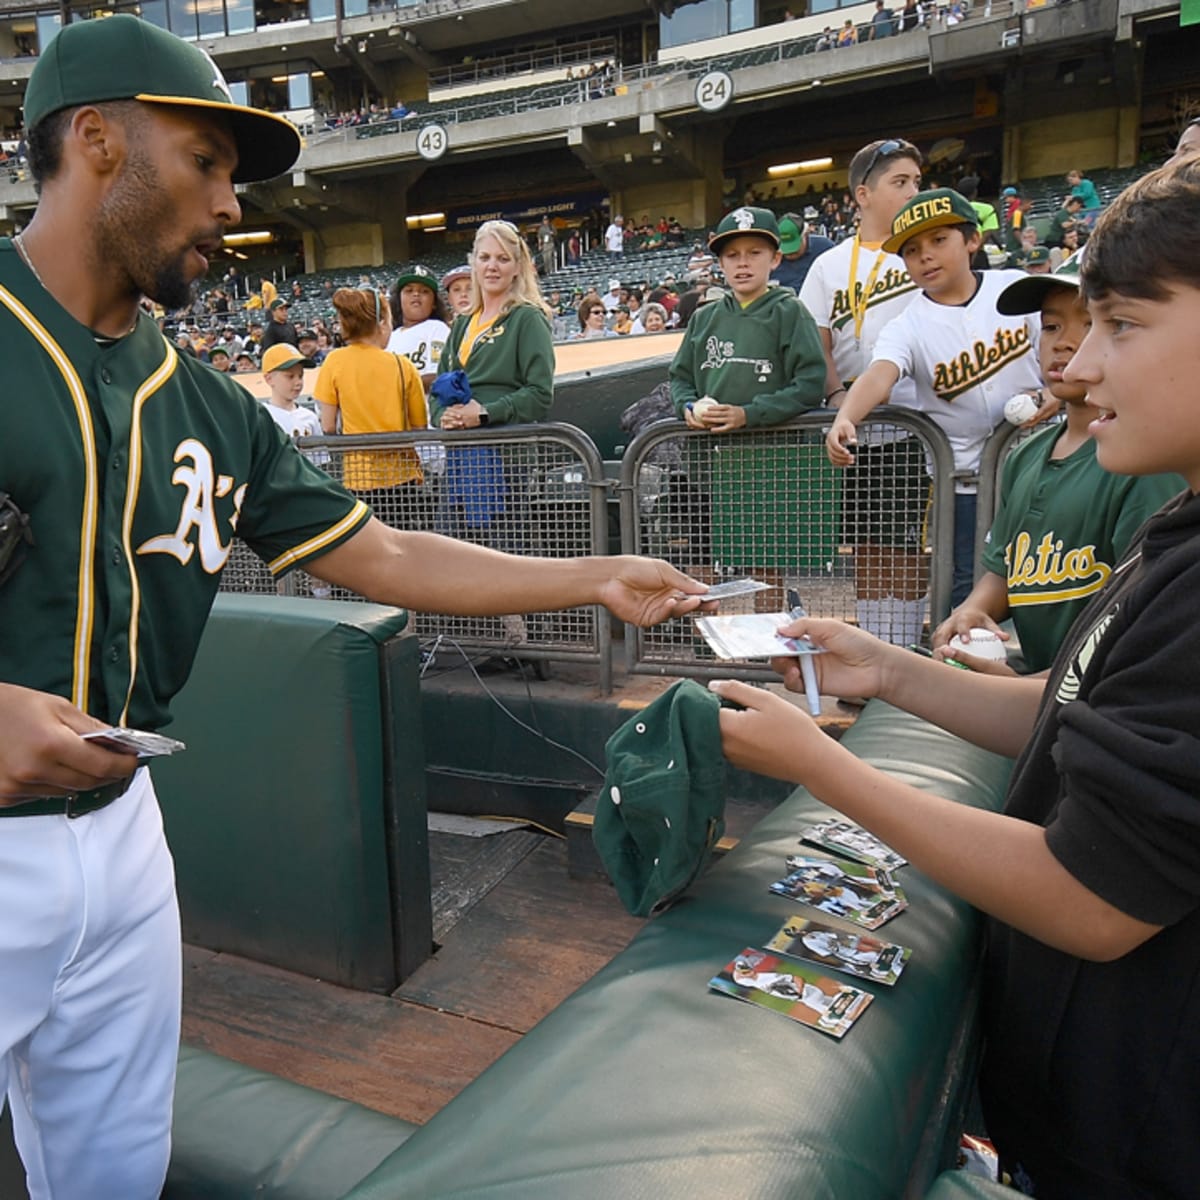 A's offer free tickets to fans for 50th anniversary game - Sports